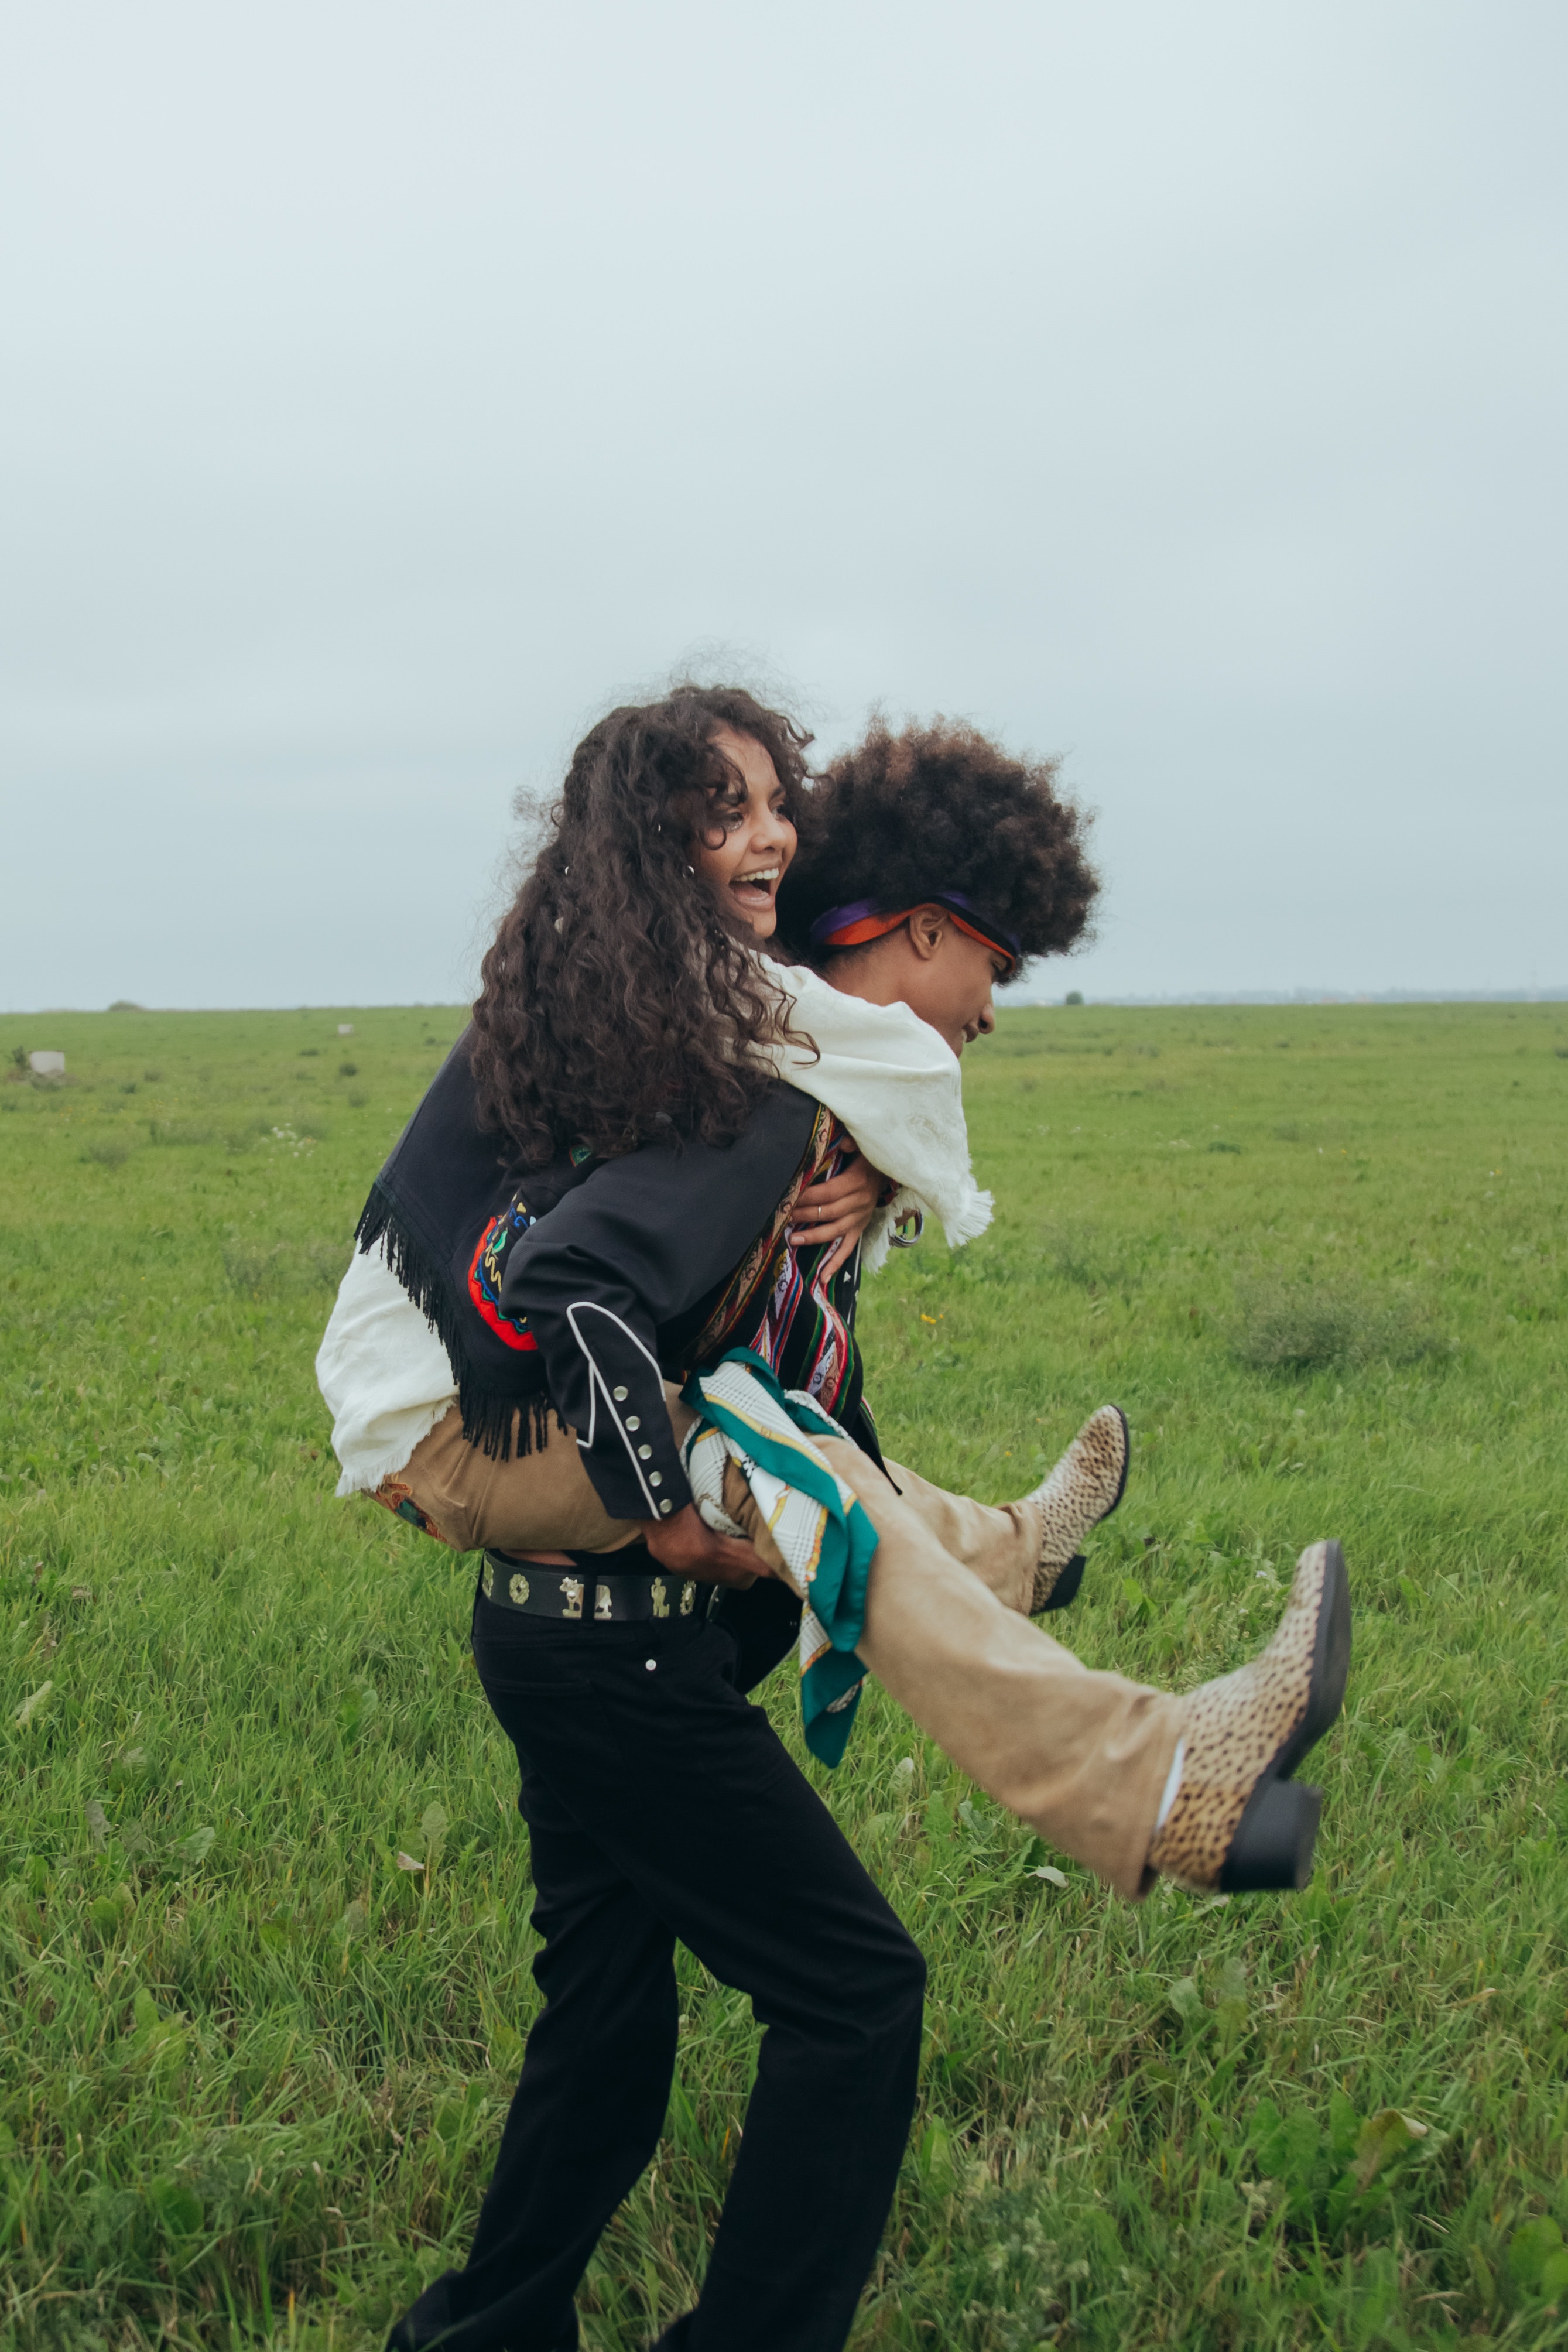 A woman and a man in the field. | Source: Pexels